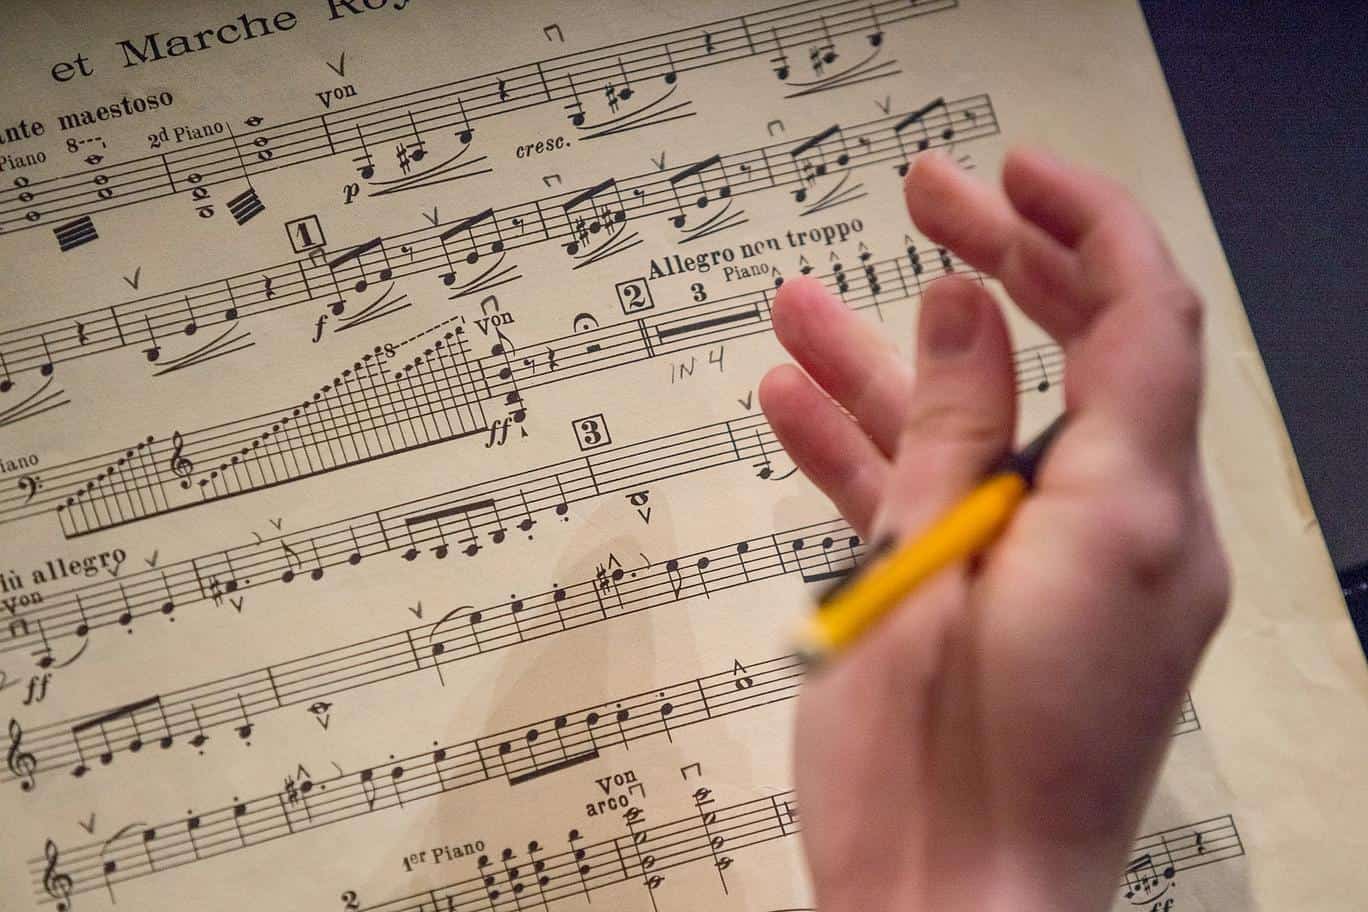 close up of a hand holding a pencil above sheet music, conducting